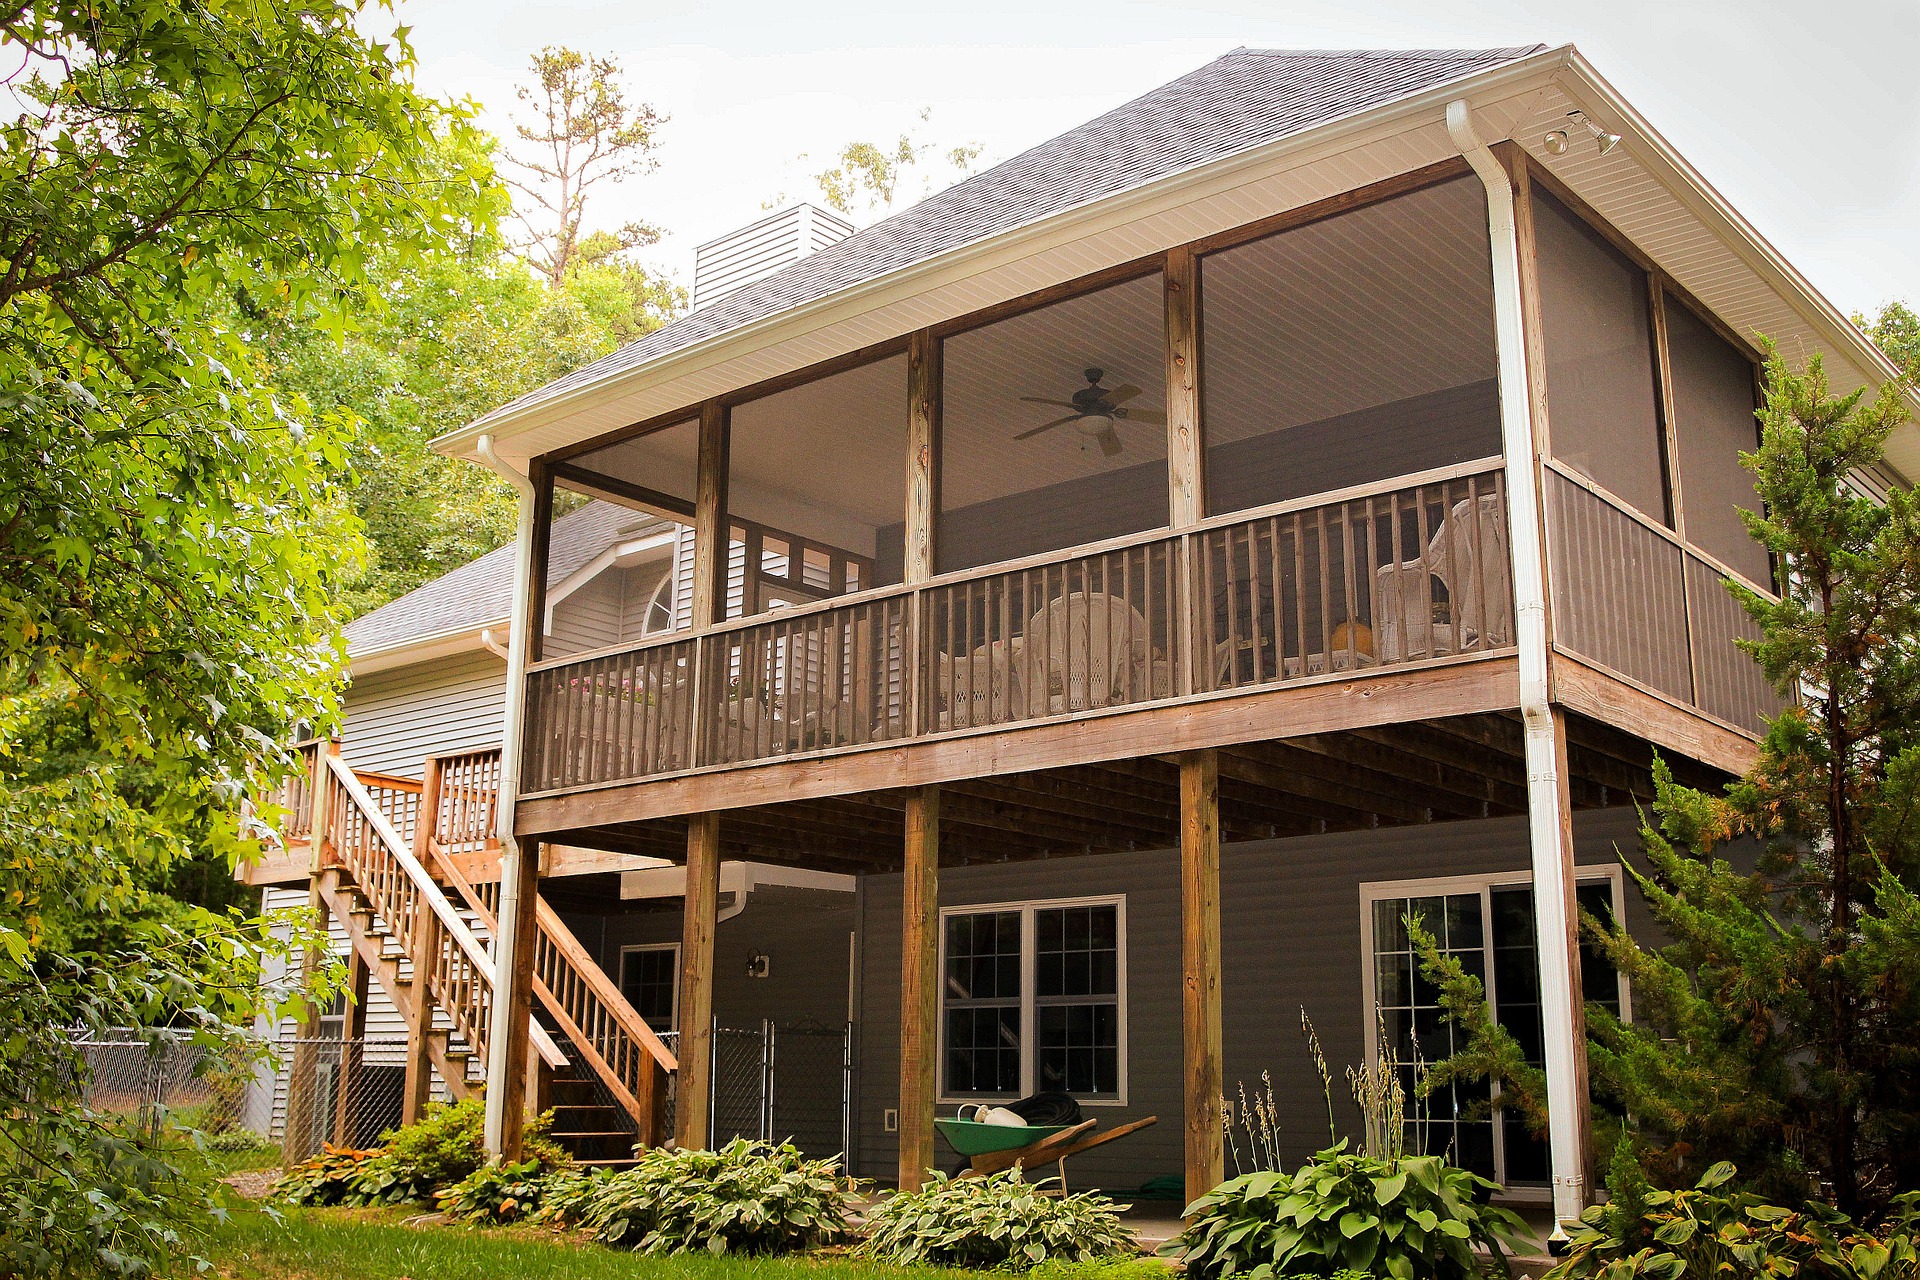 View of rear view of house showing wooden deck and patio